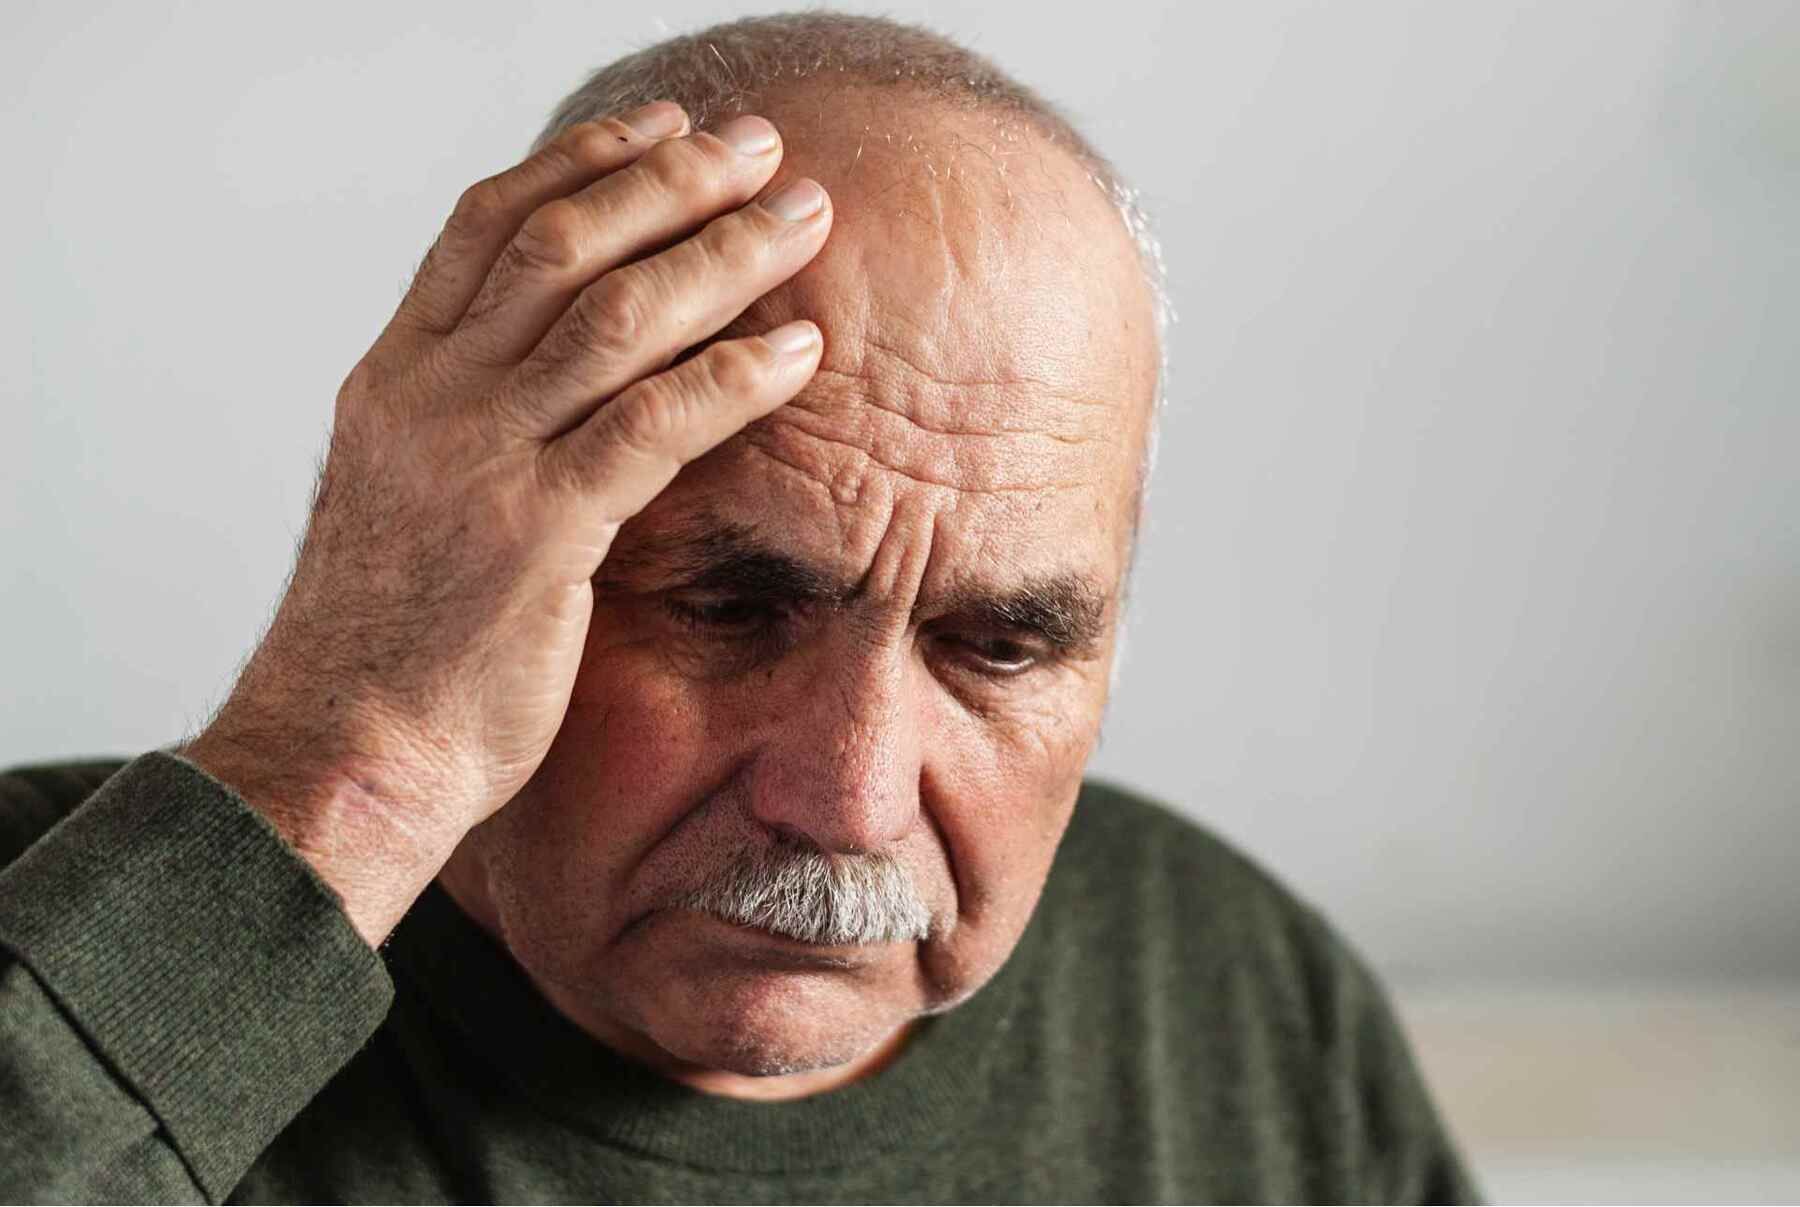 what causes alzheimers